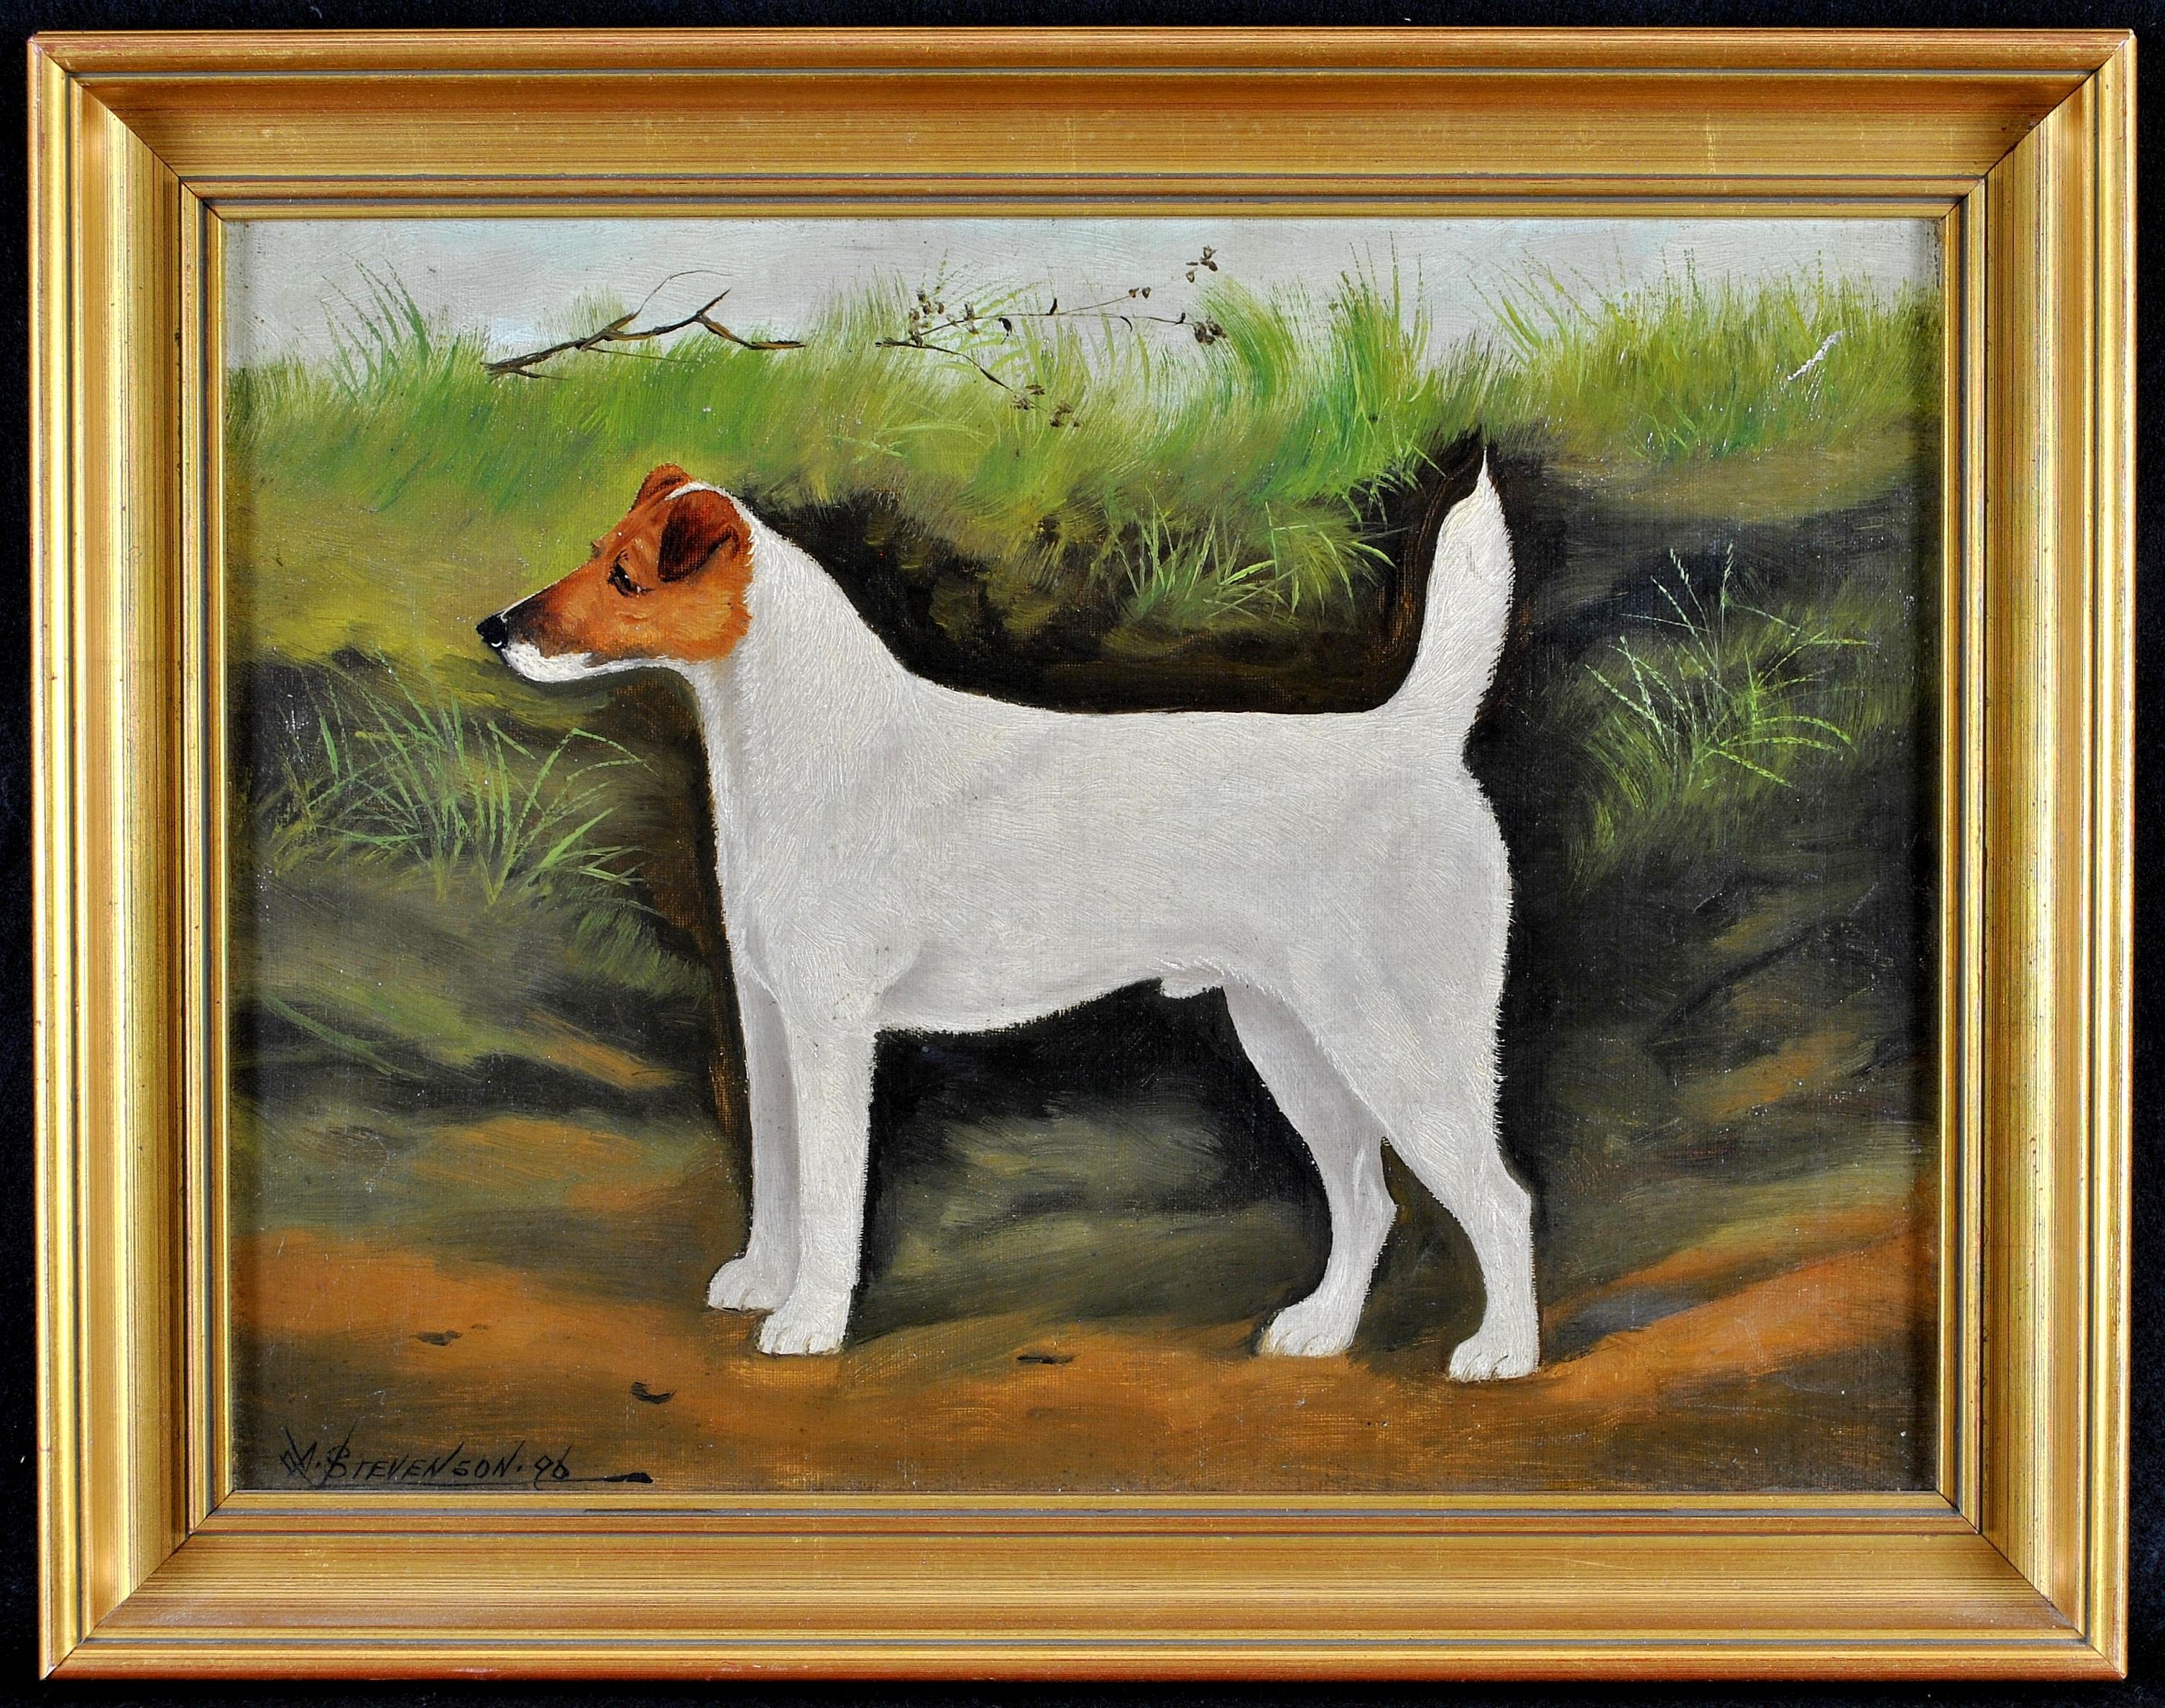 A. Stevenson Animal Painting - Terrier in a Landscape - 19th Century Oil on Canvas Antique Dog Painting